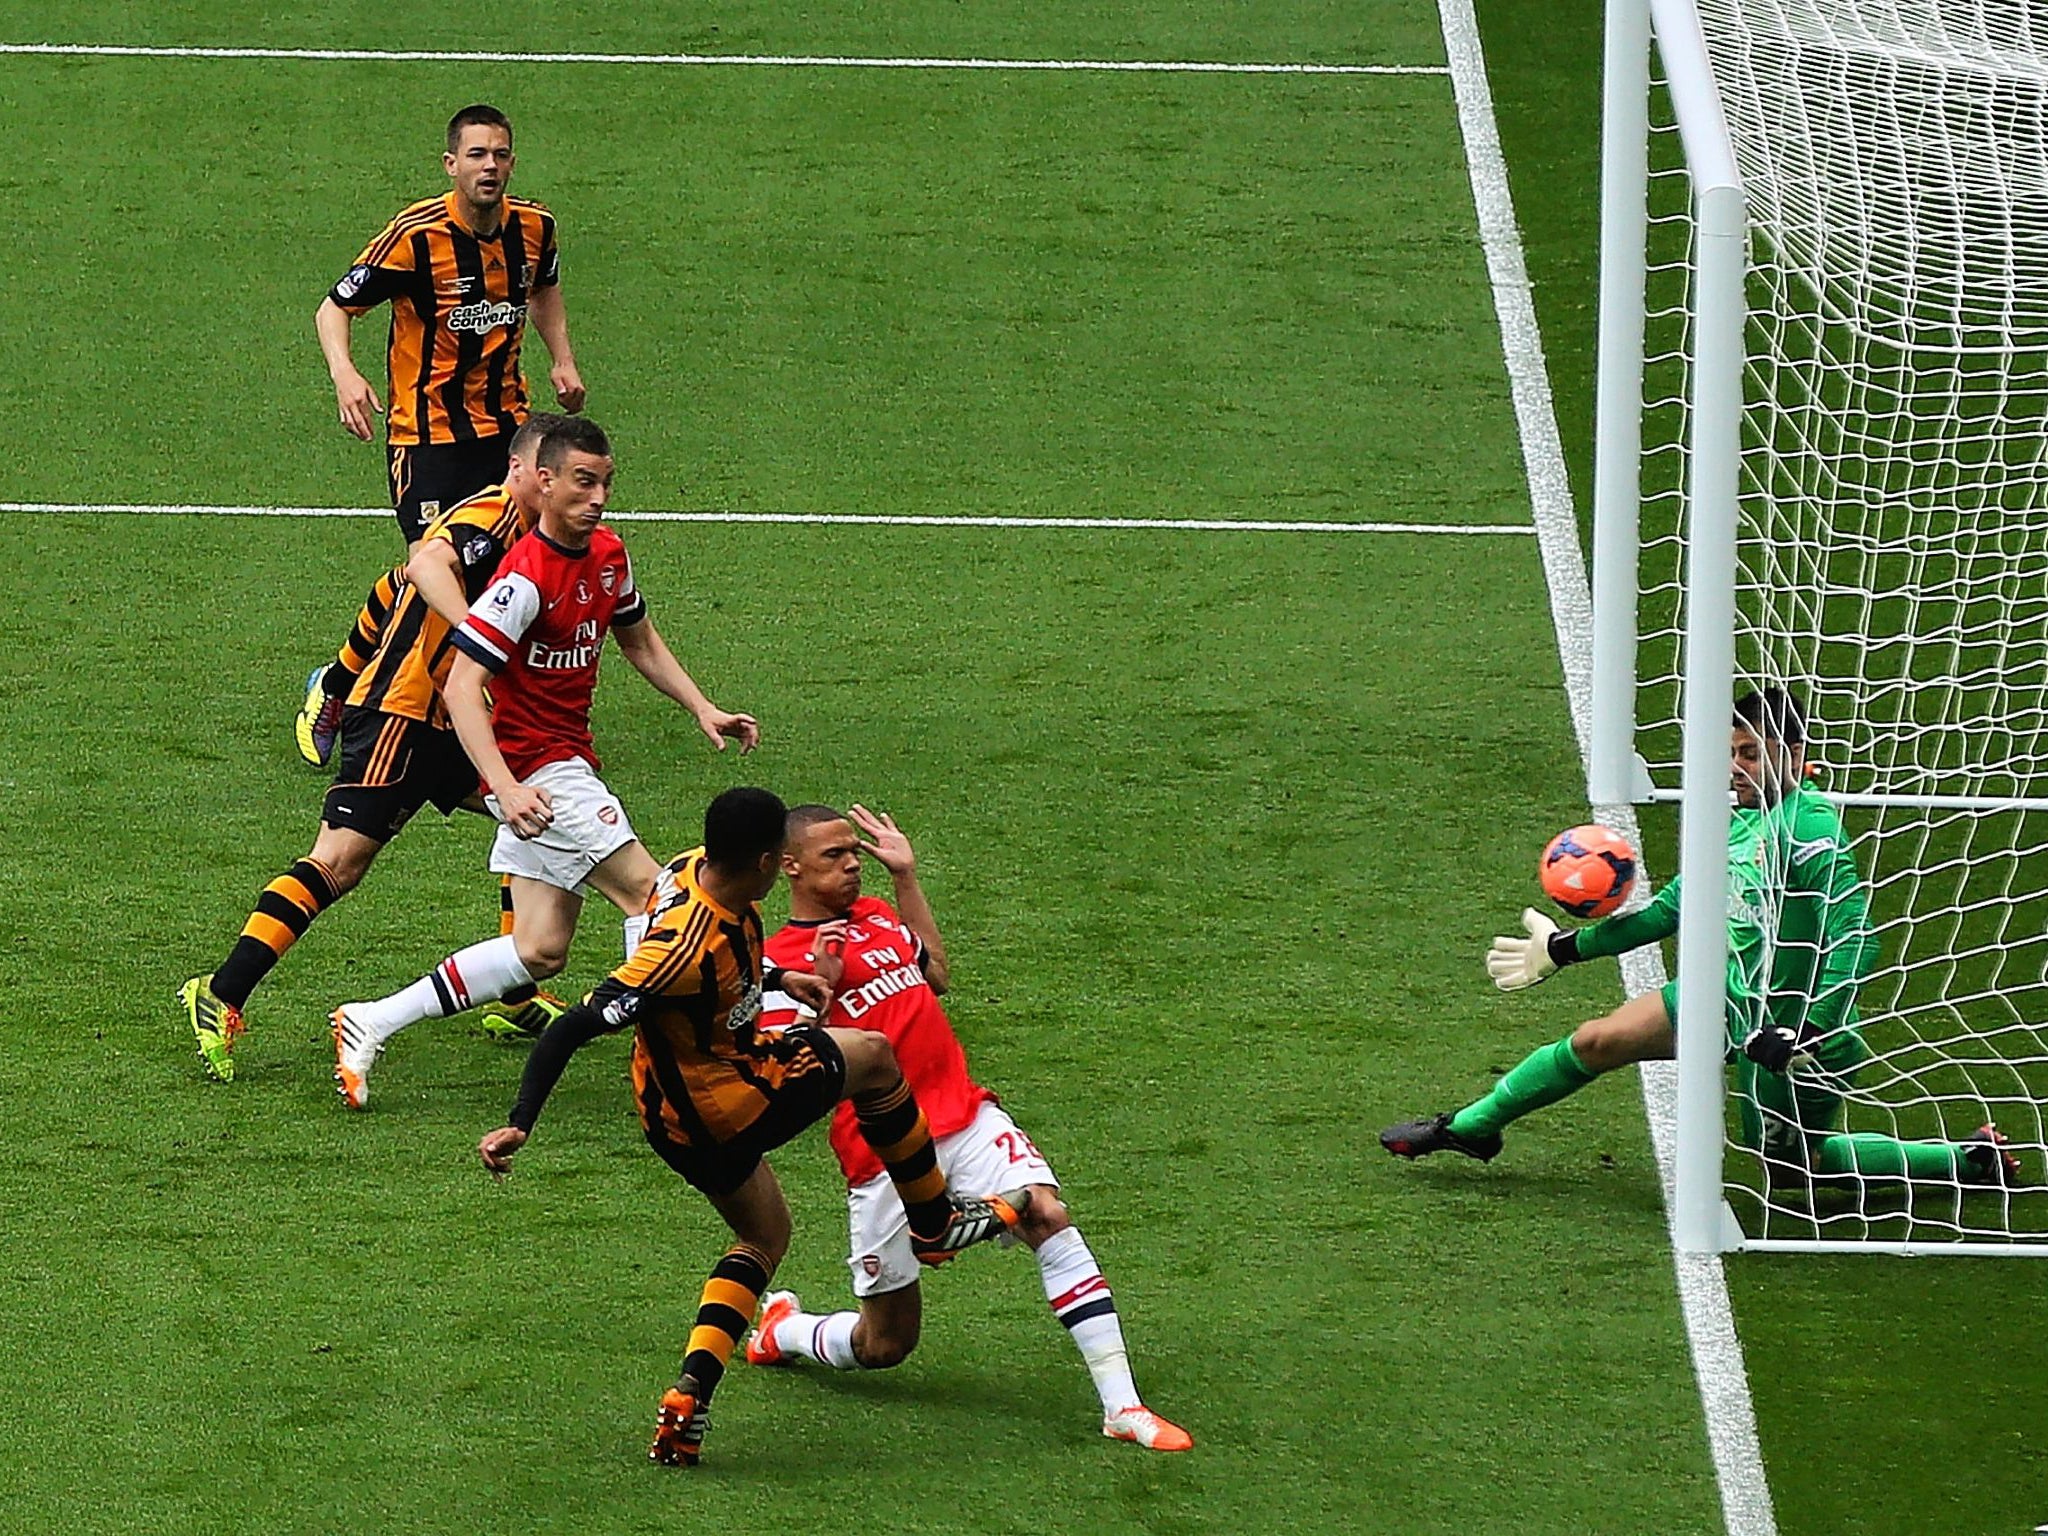 Curtis Davies scores Hull’s second goal to make it 2-0 after eight minutes, much to the consternation of Arsène Wenger